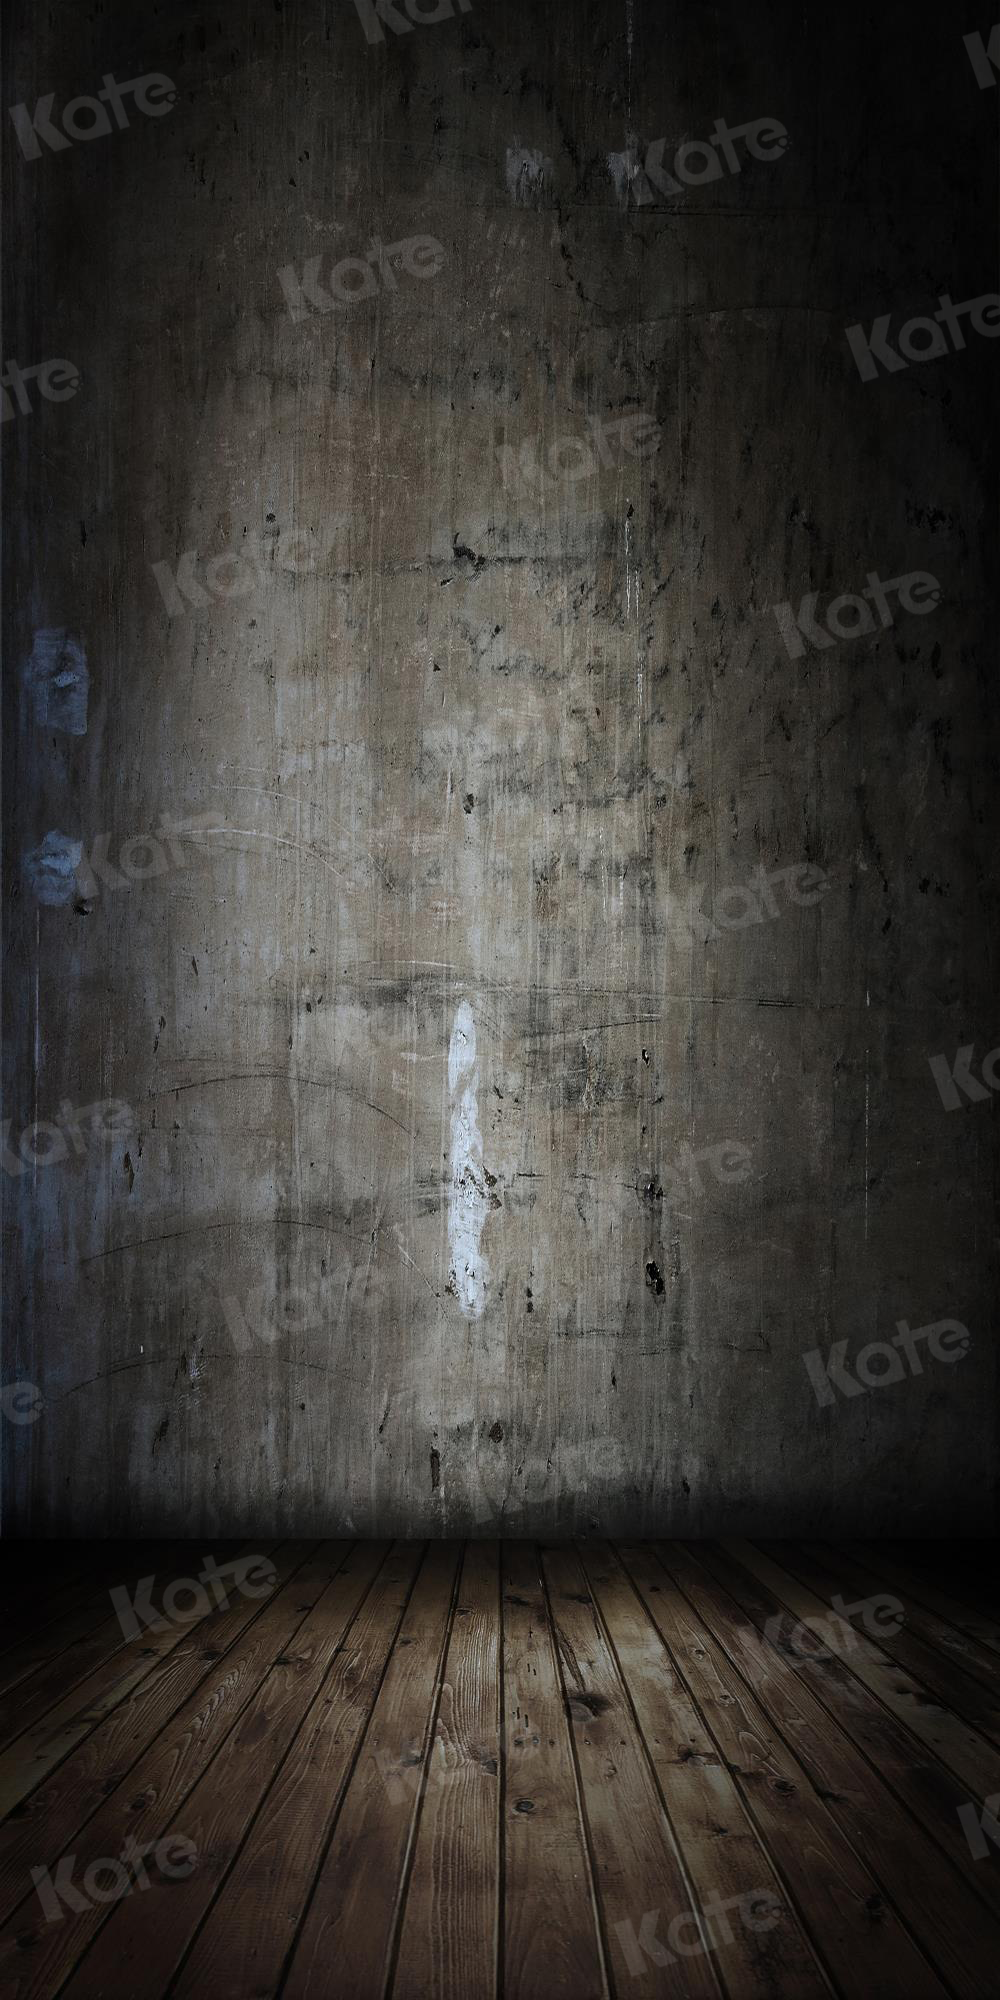 Kate Abstract Textured Dark Iron Concrete Wall liked Vintage Backdrop for Photography - Katebackdrop